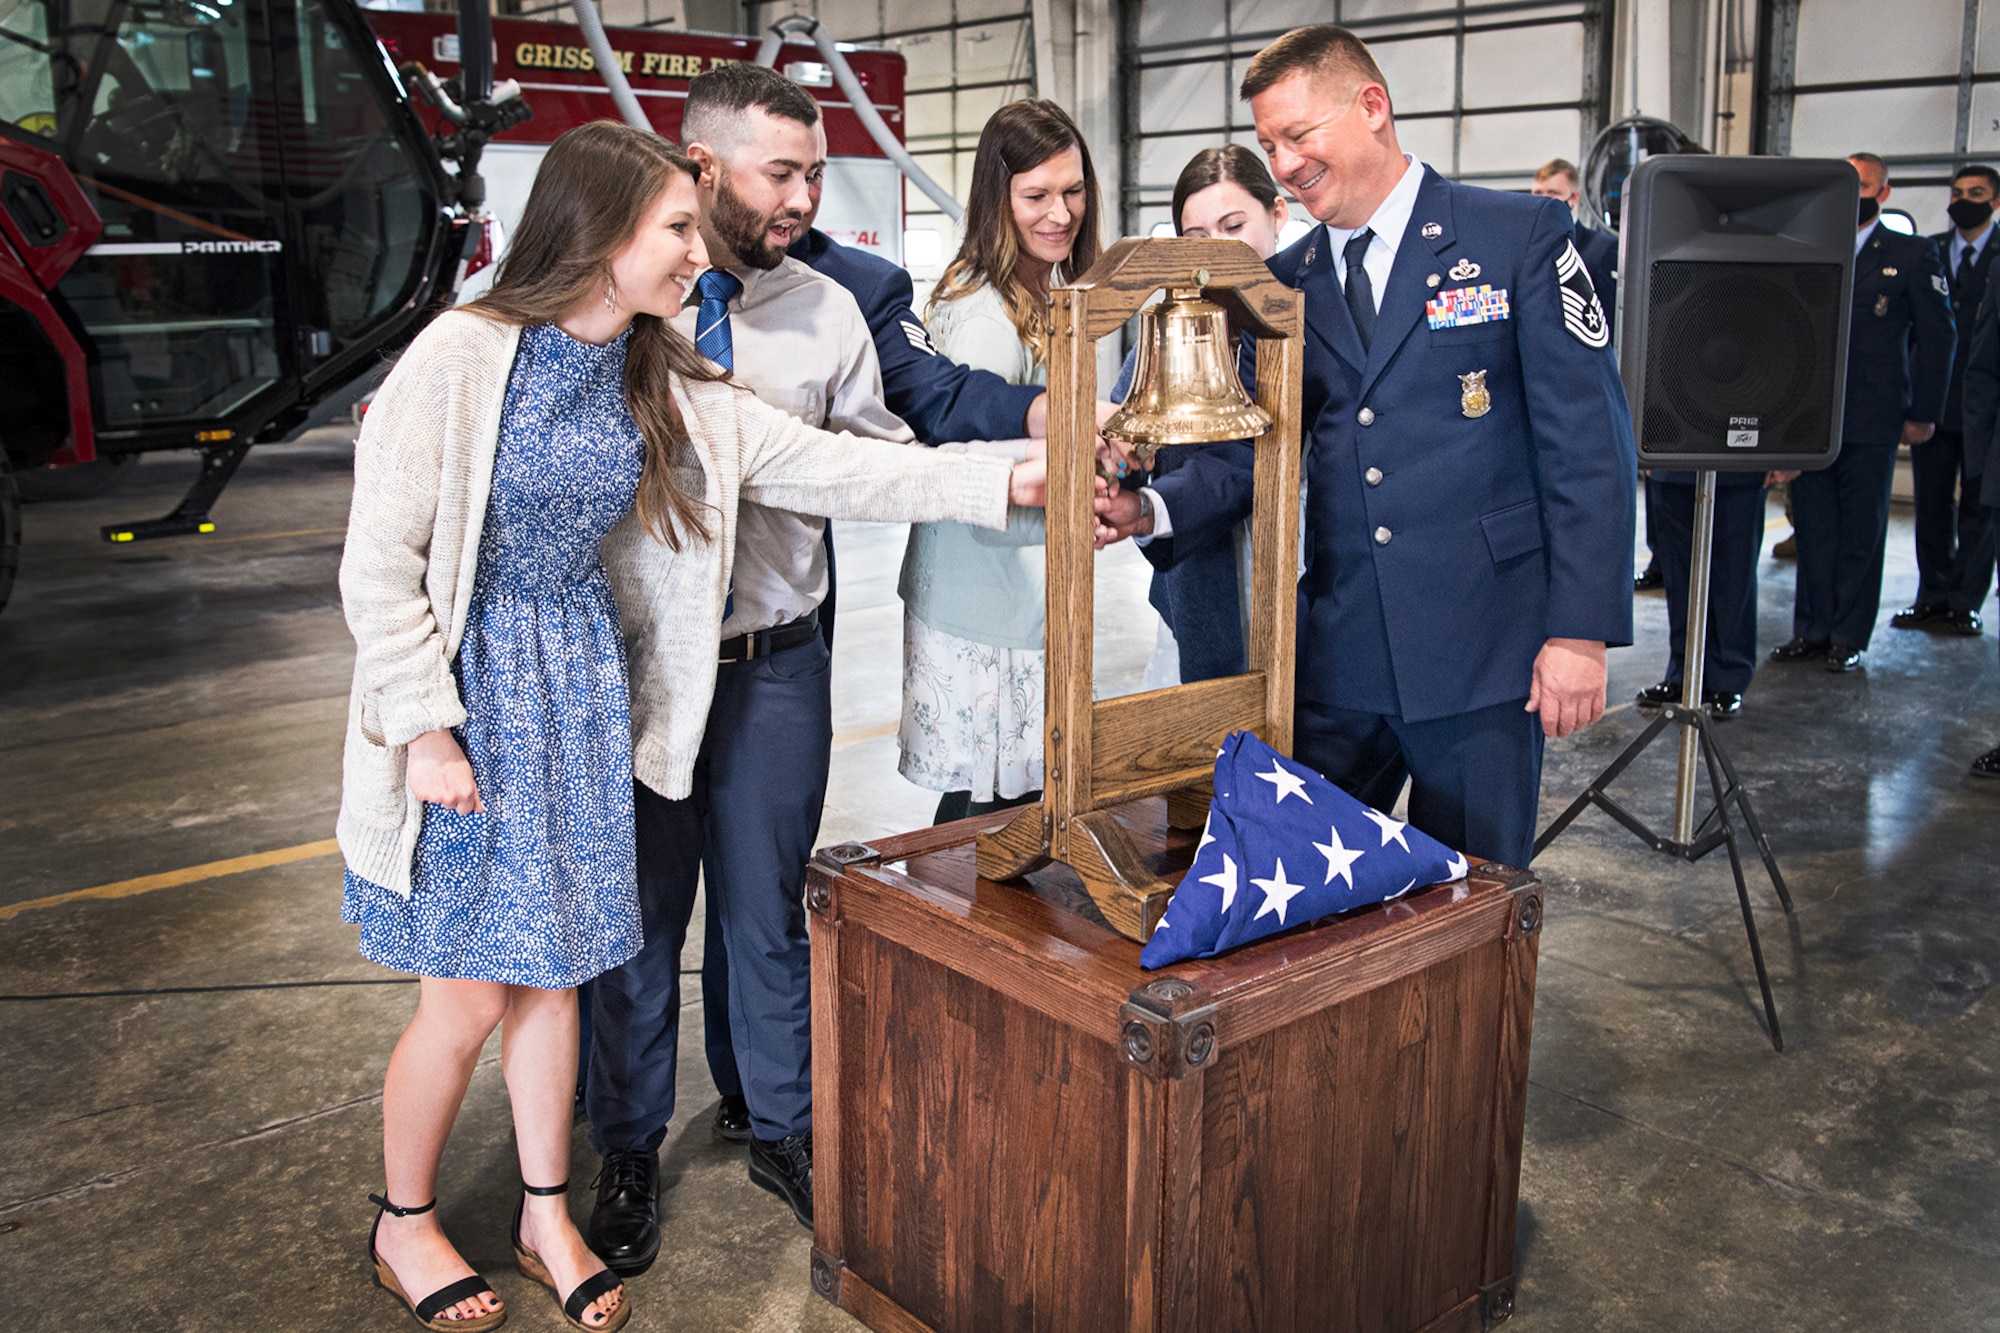 Dehner's retirement ceremony was held April 24, 2021 and was attended by family, friends and coworkers. (U.S. Air Force photo/Douglas Hays)